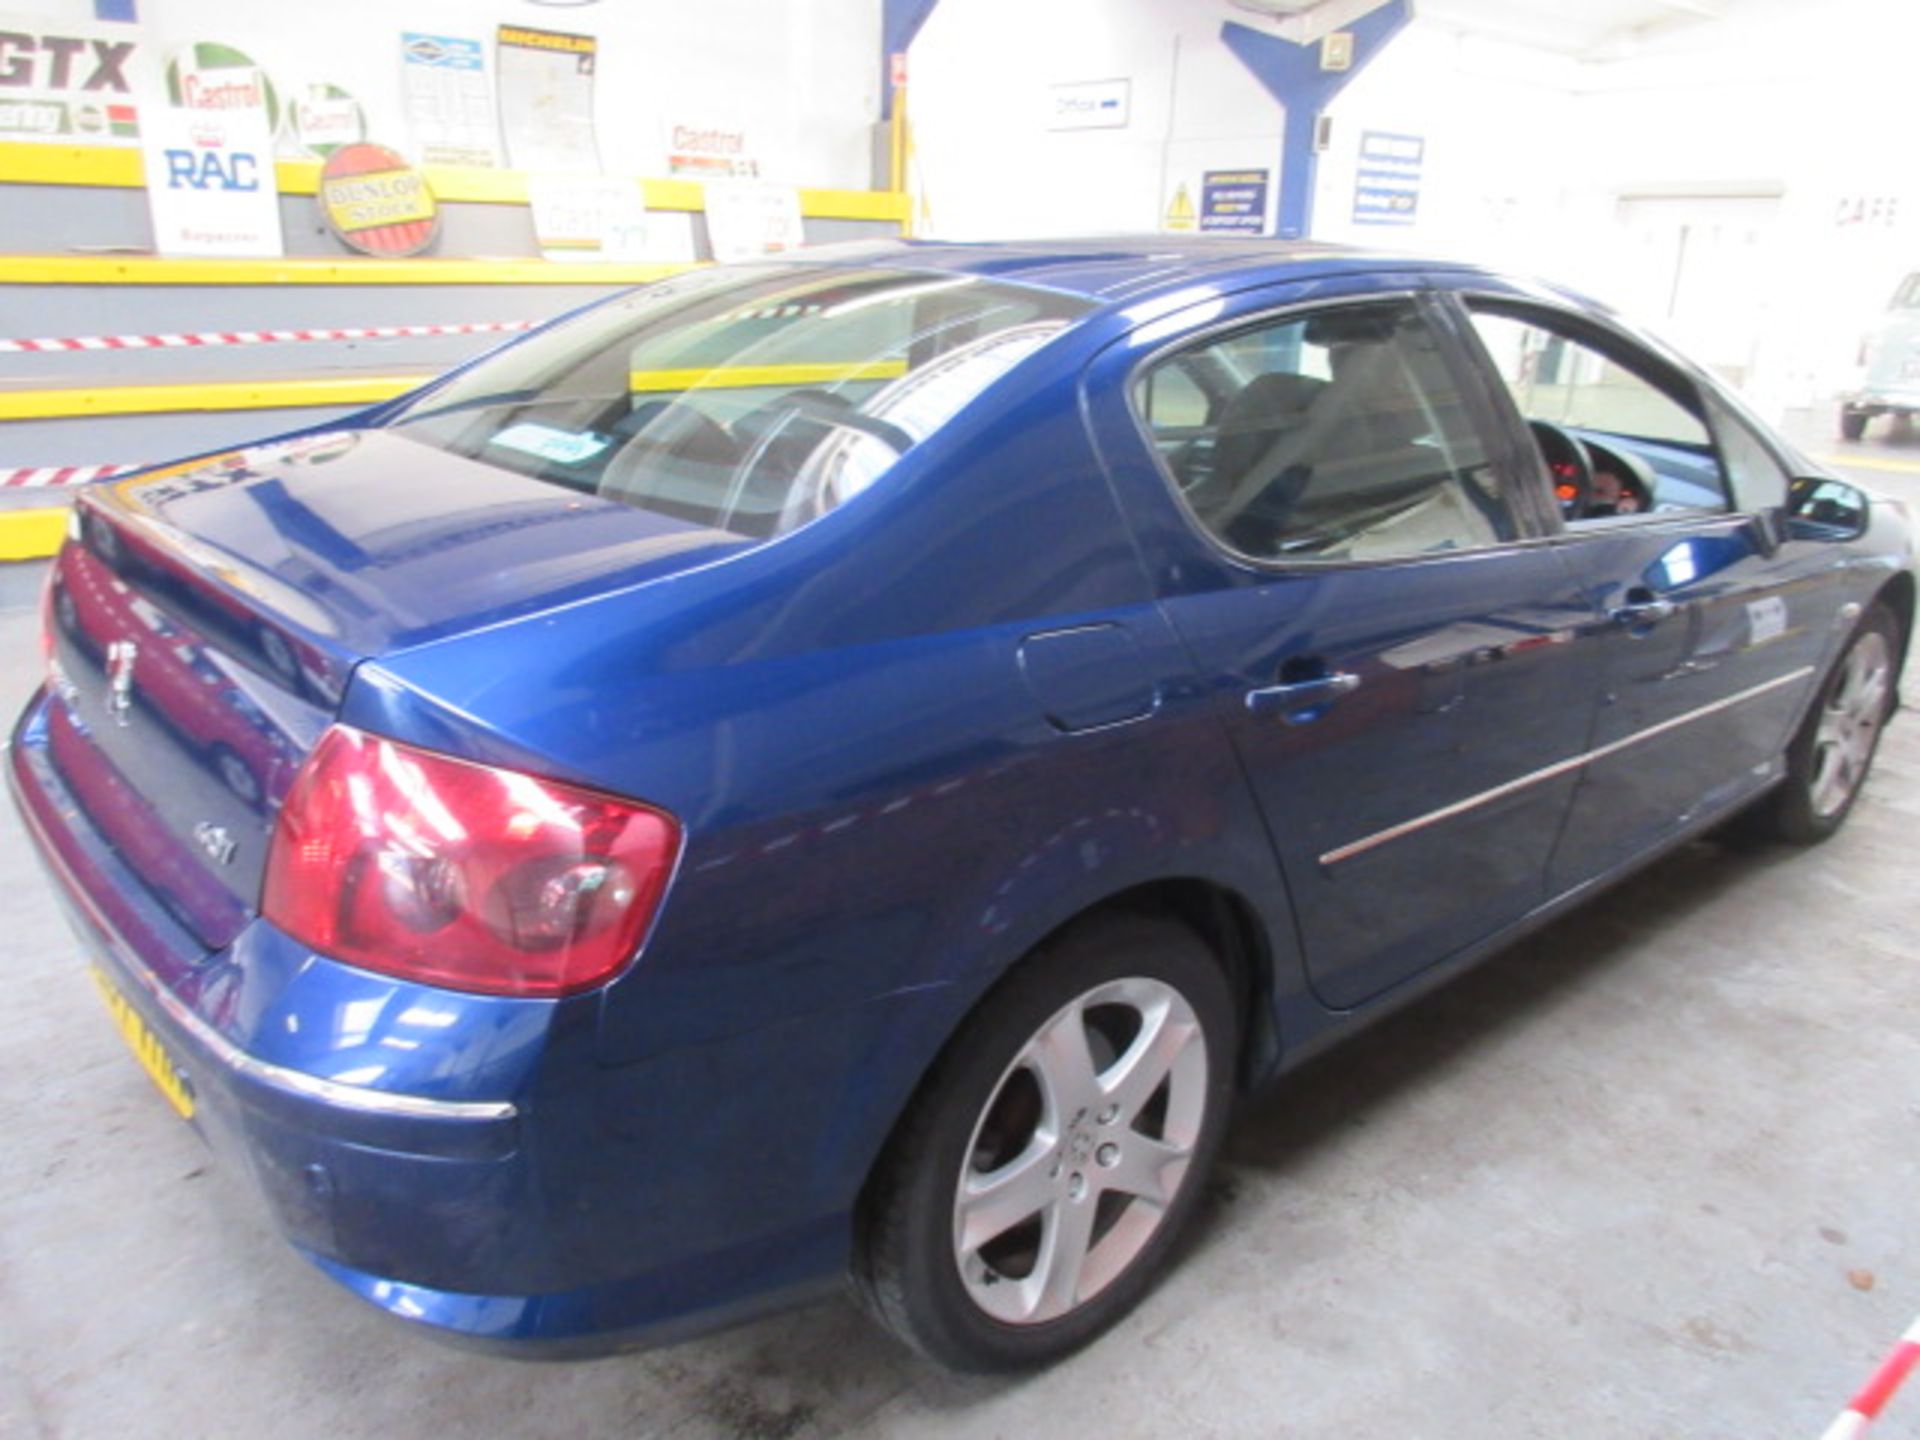 07 07 Peugeot 407 GT HDI - Image 3 of 6